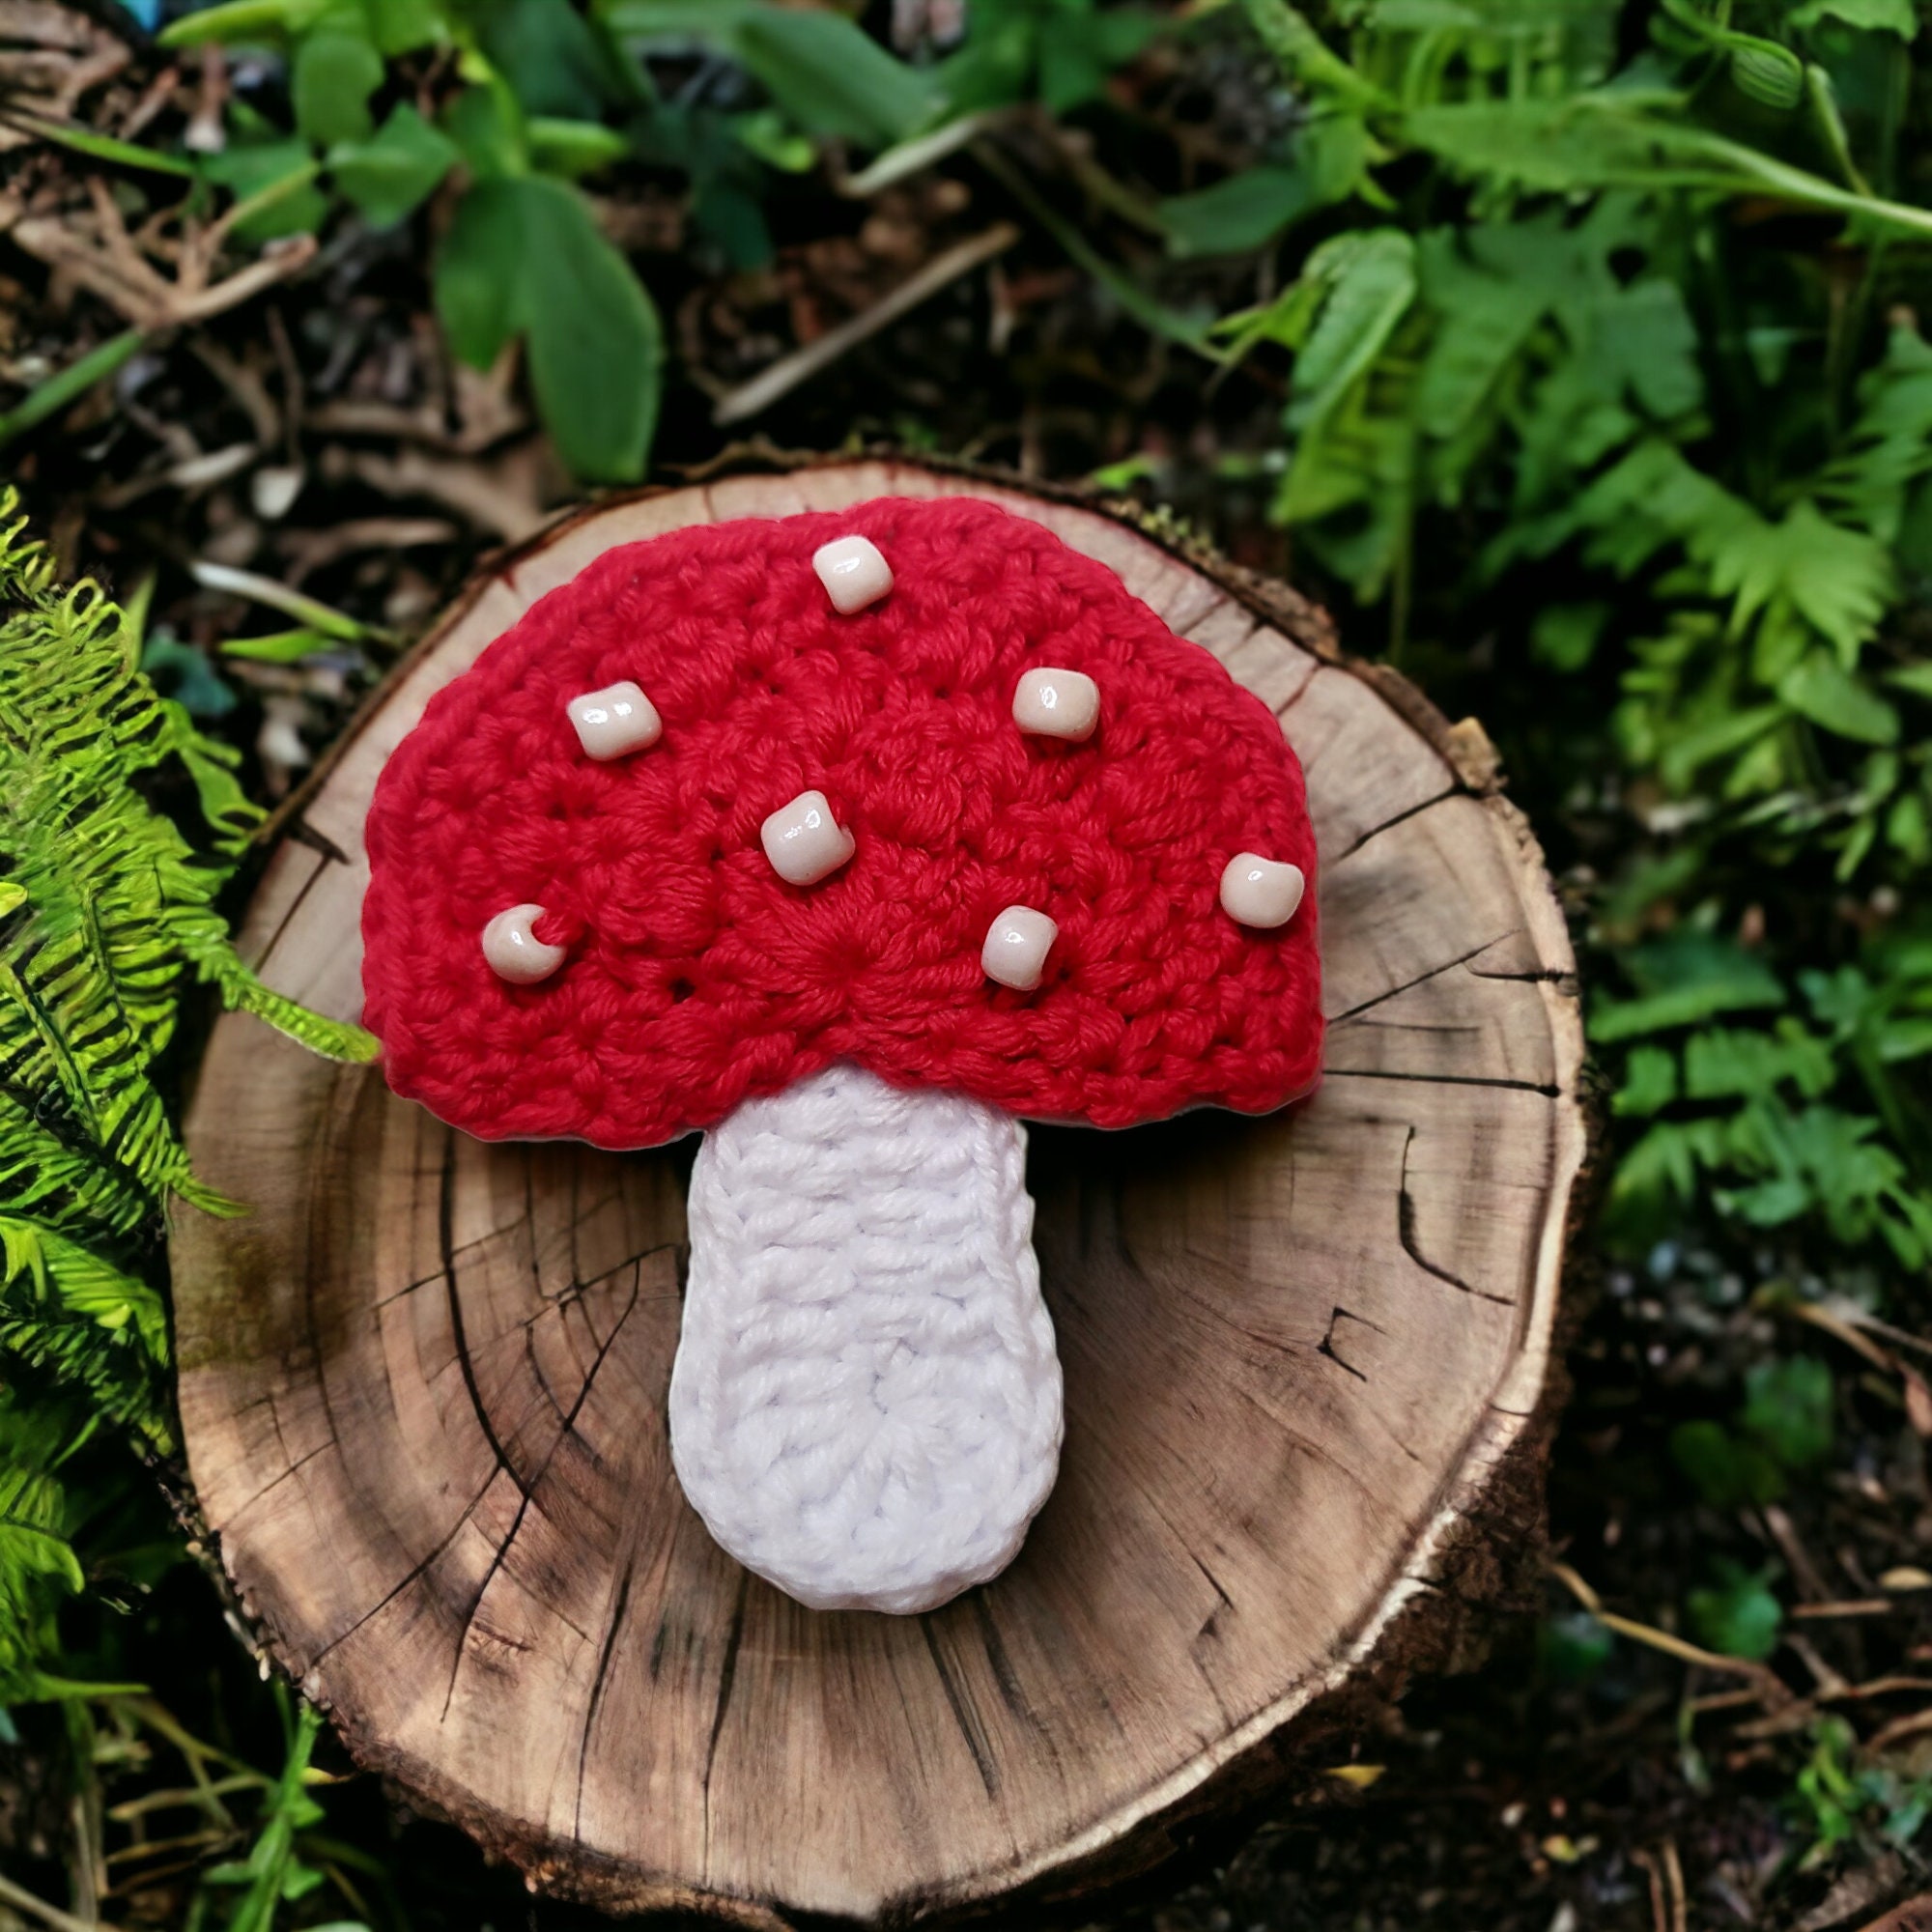 Cute Red Cap Mushroom Iron On Patch - Cottagecore Embroidered